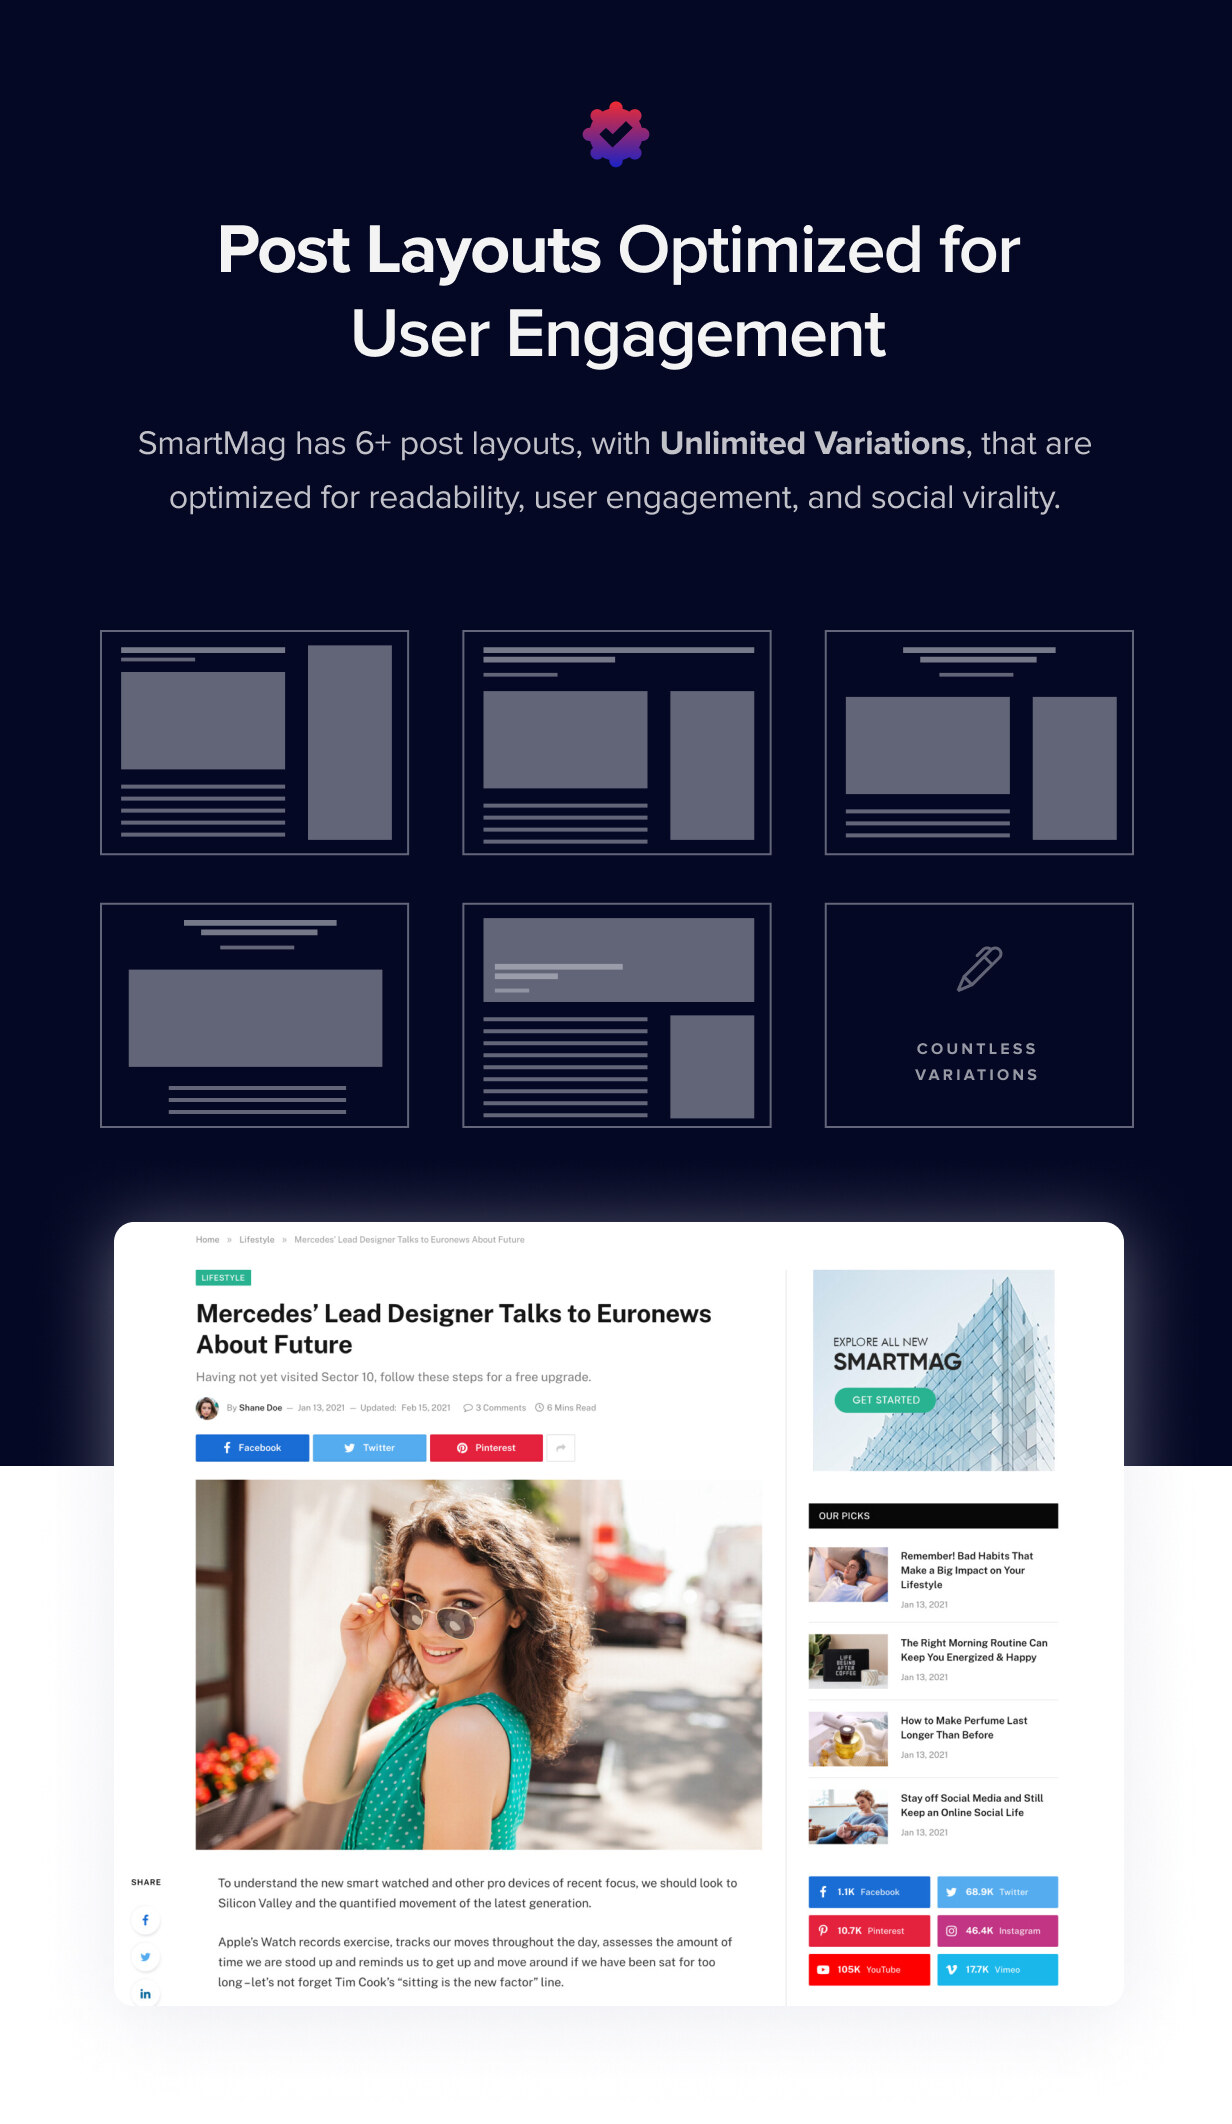 Post layouts optimized for user engagement.